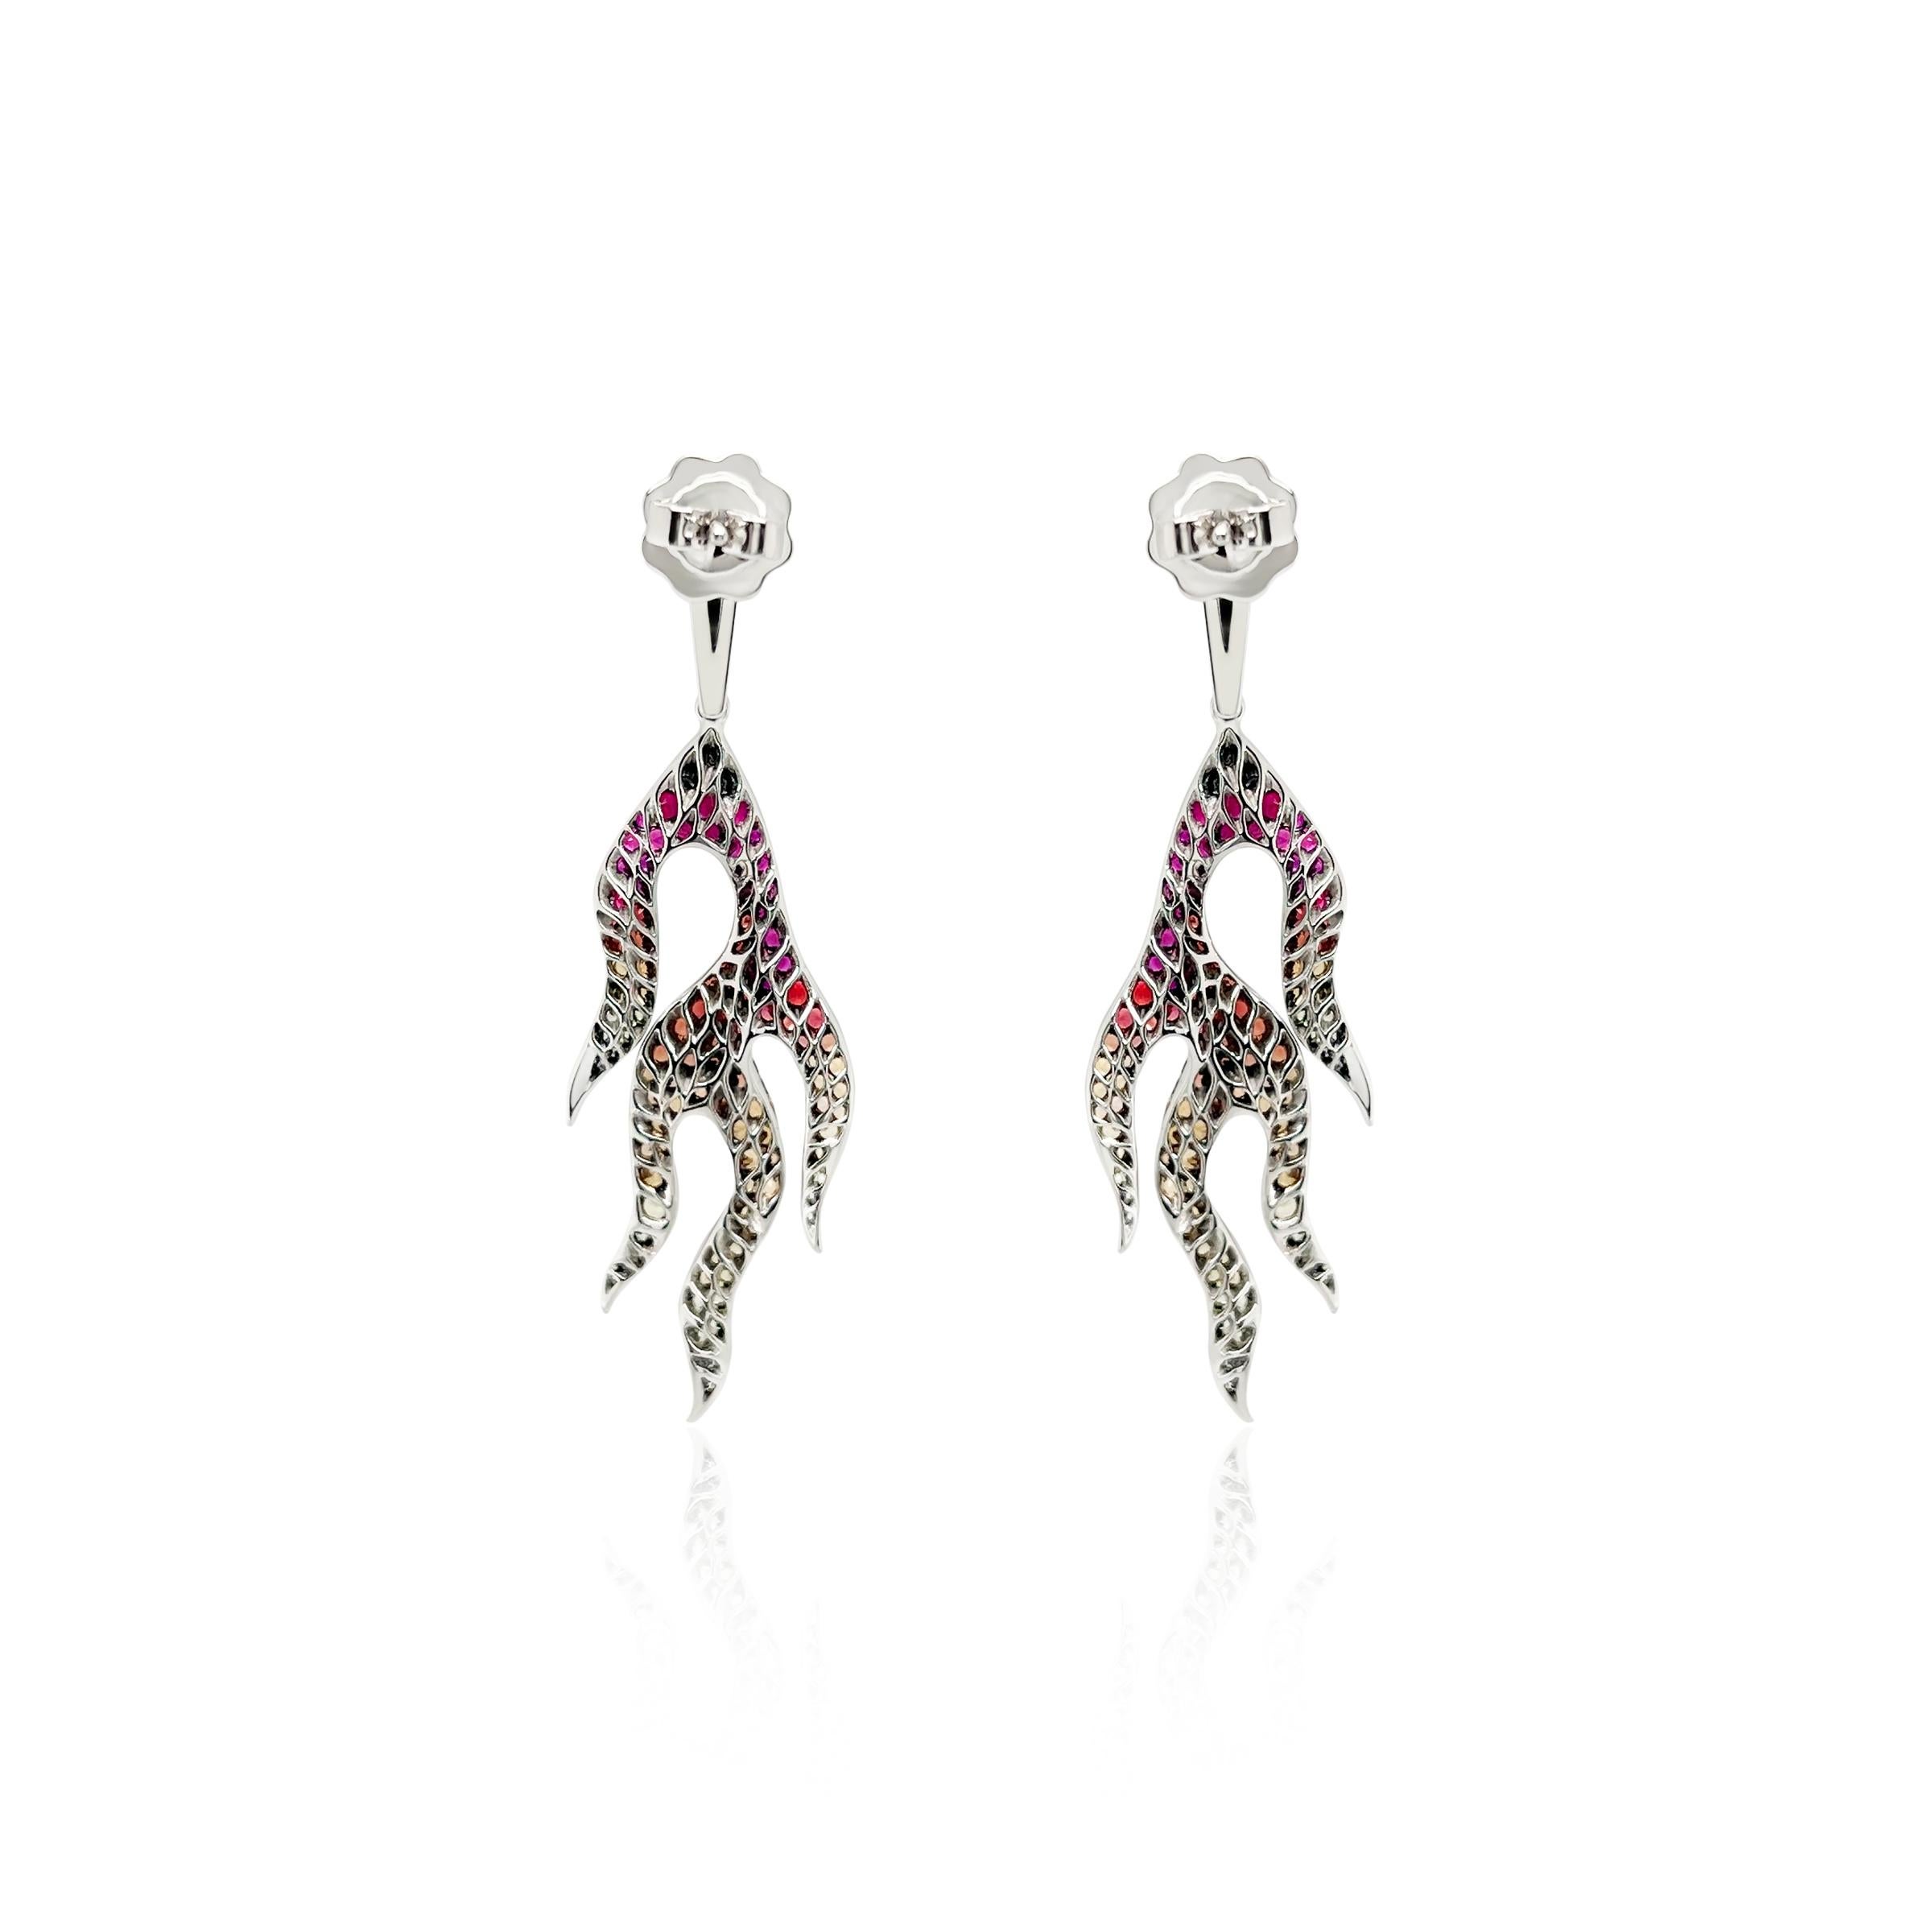 These Diamond, Ruby and Sapphire Flame Earrings are masterfully designed and set in 18k white gold with black rhodium highlights. These earrings showcase a symphony of colors that cascade with meticulously selected and arranged gemstones. The